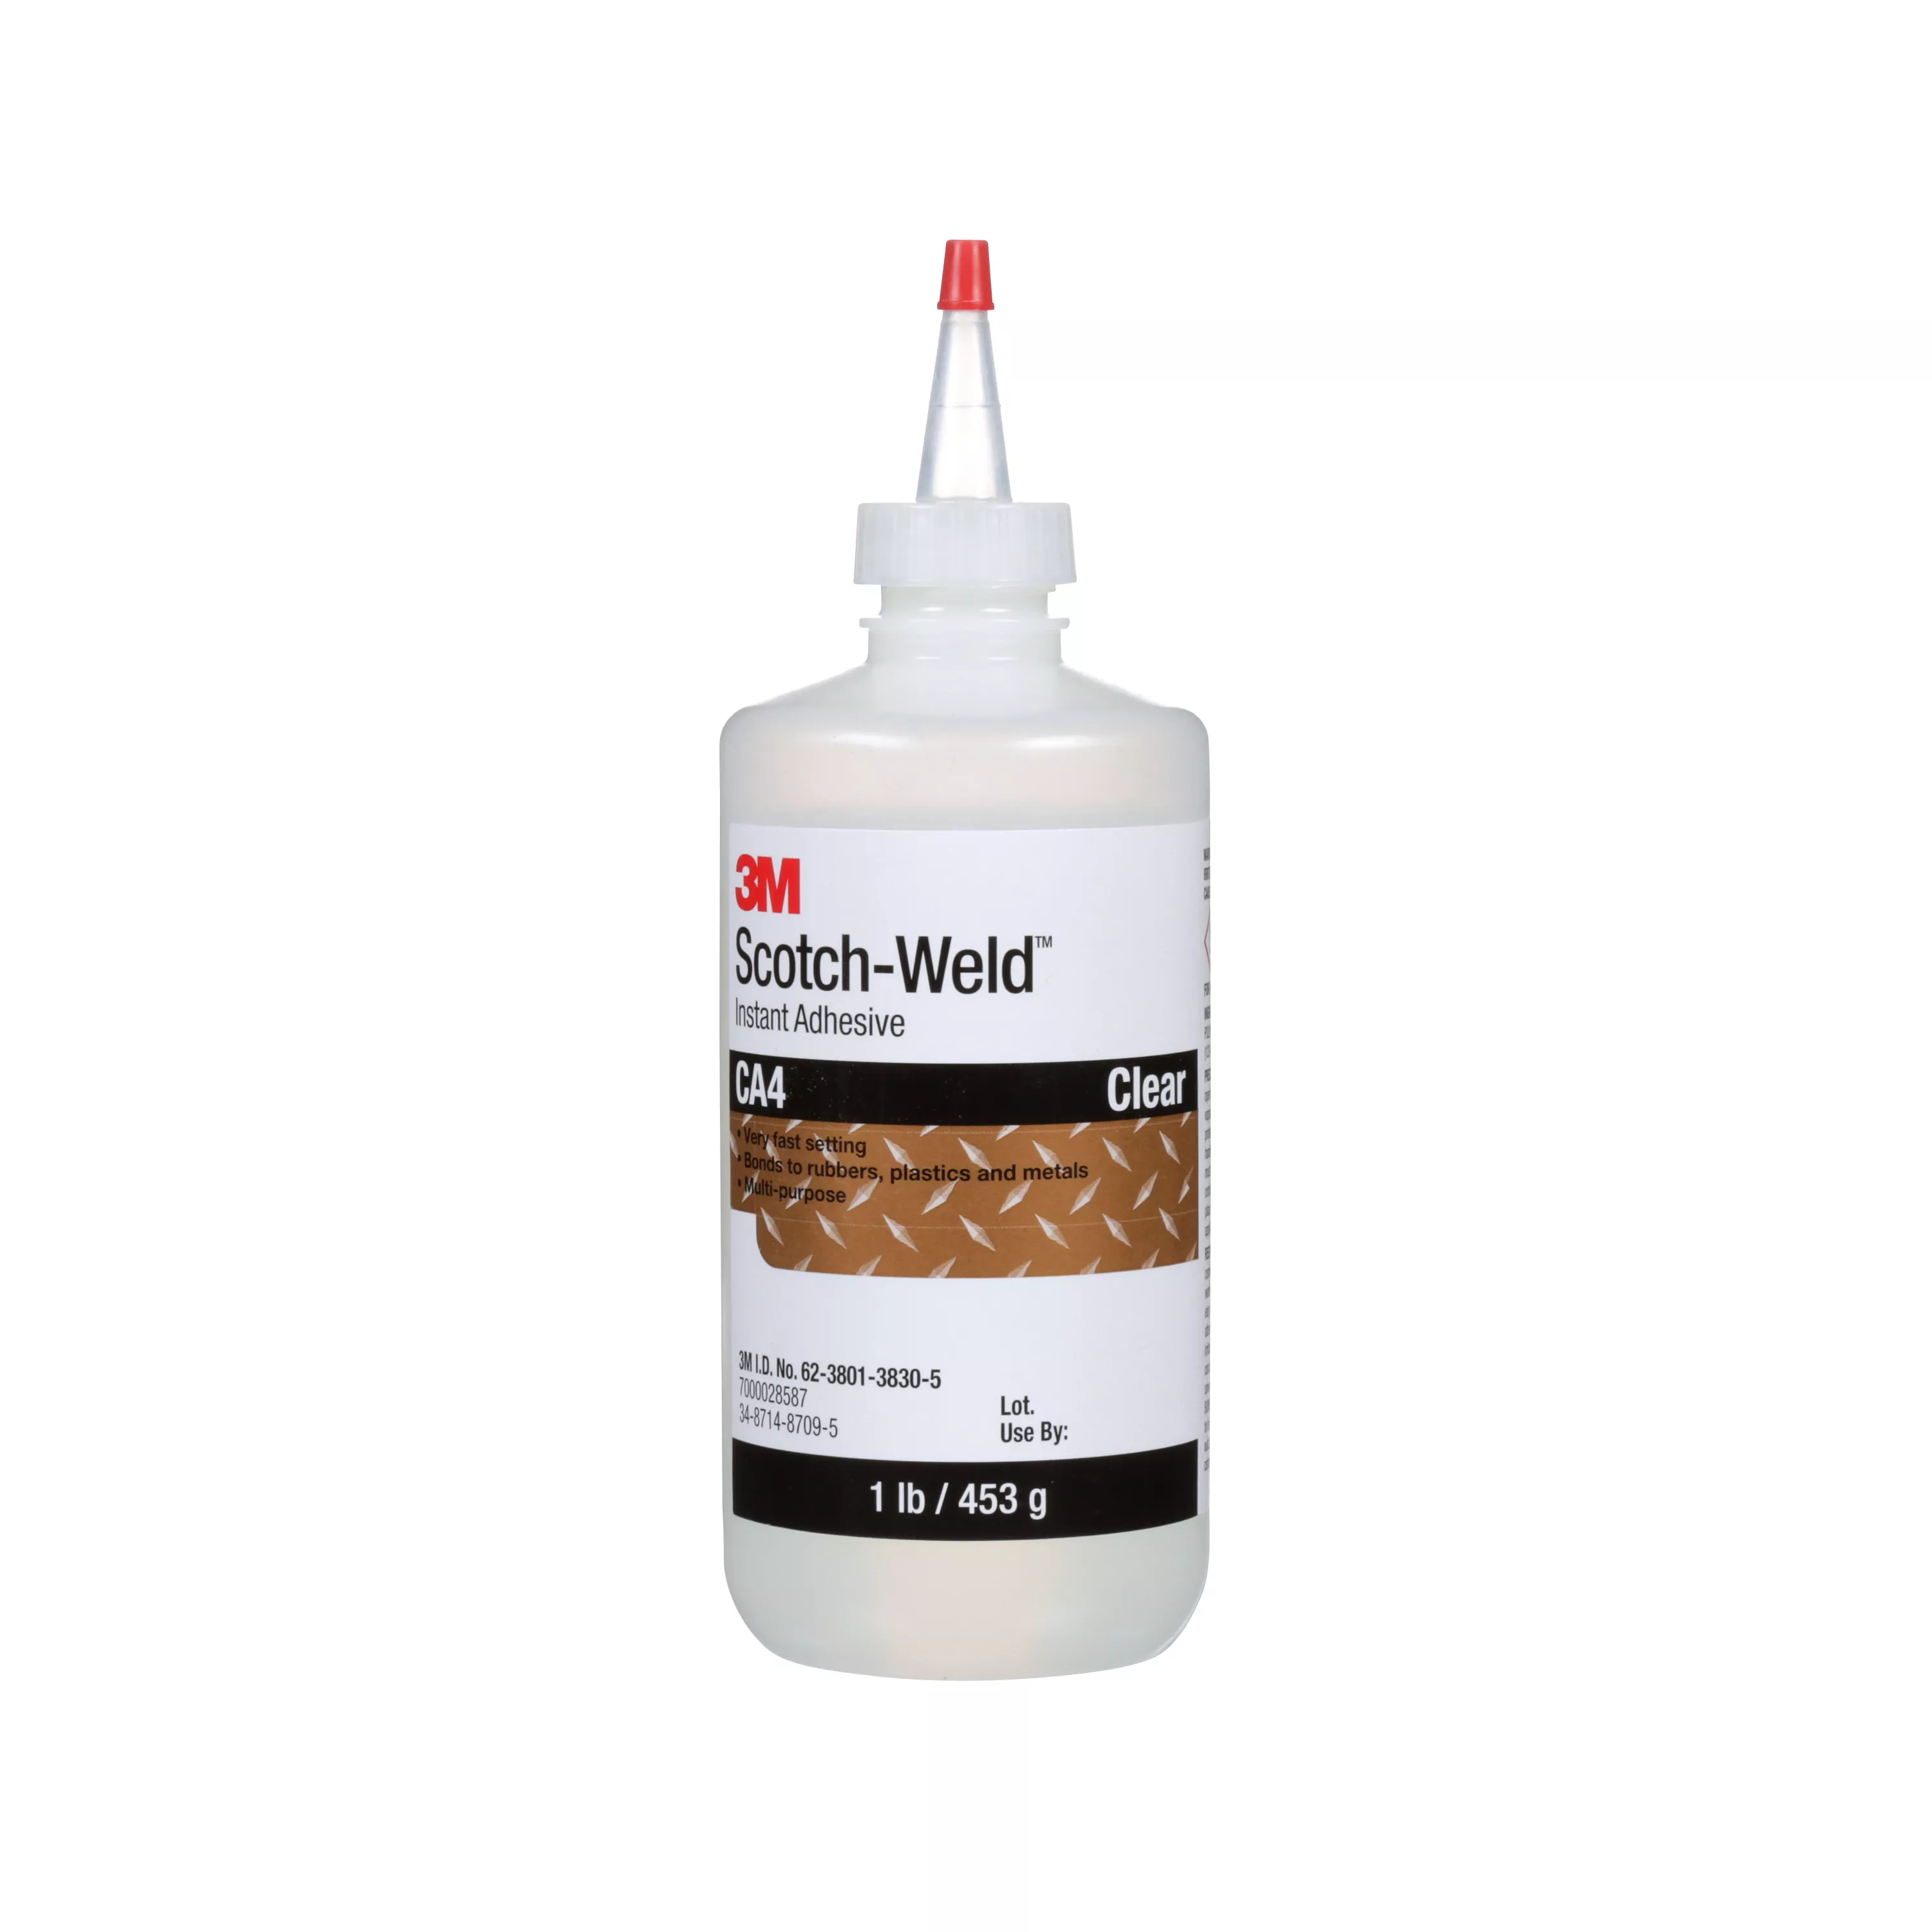 3M™ Scotch-Weld™ Instant Adhesive CA4, Clear, 1 Pound, 1 Bottle/Case